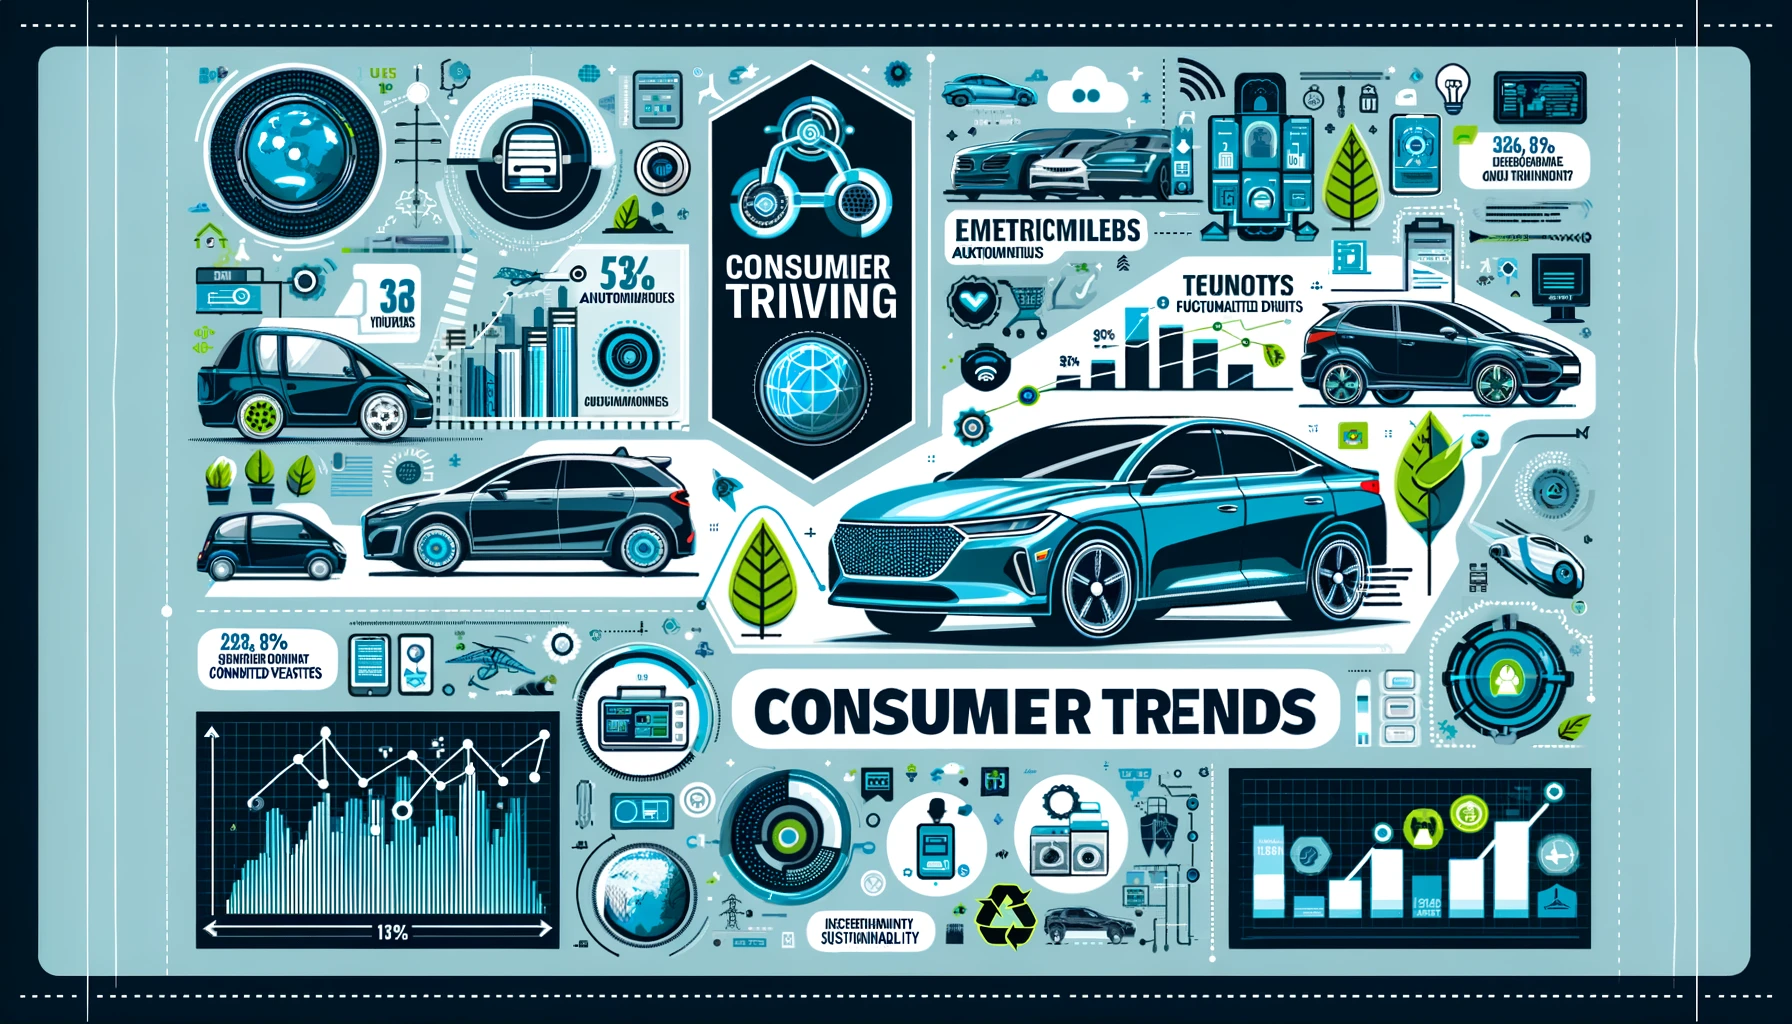 Consumer Trends for the Automotive Industry